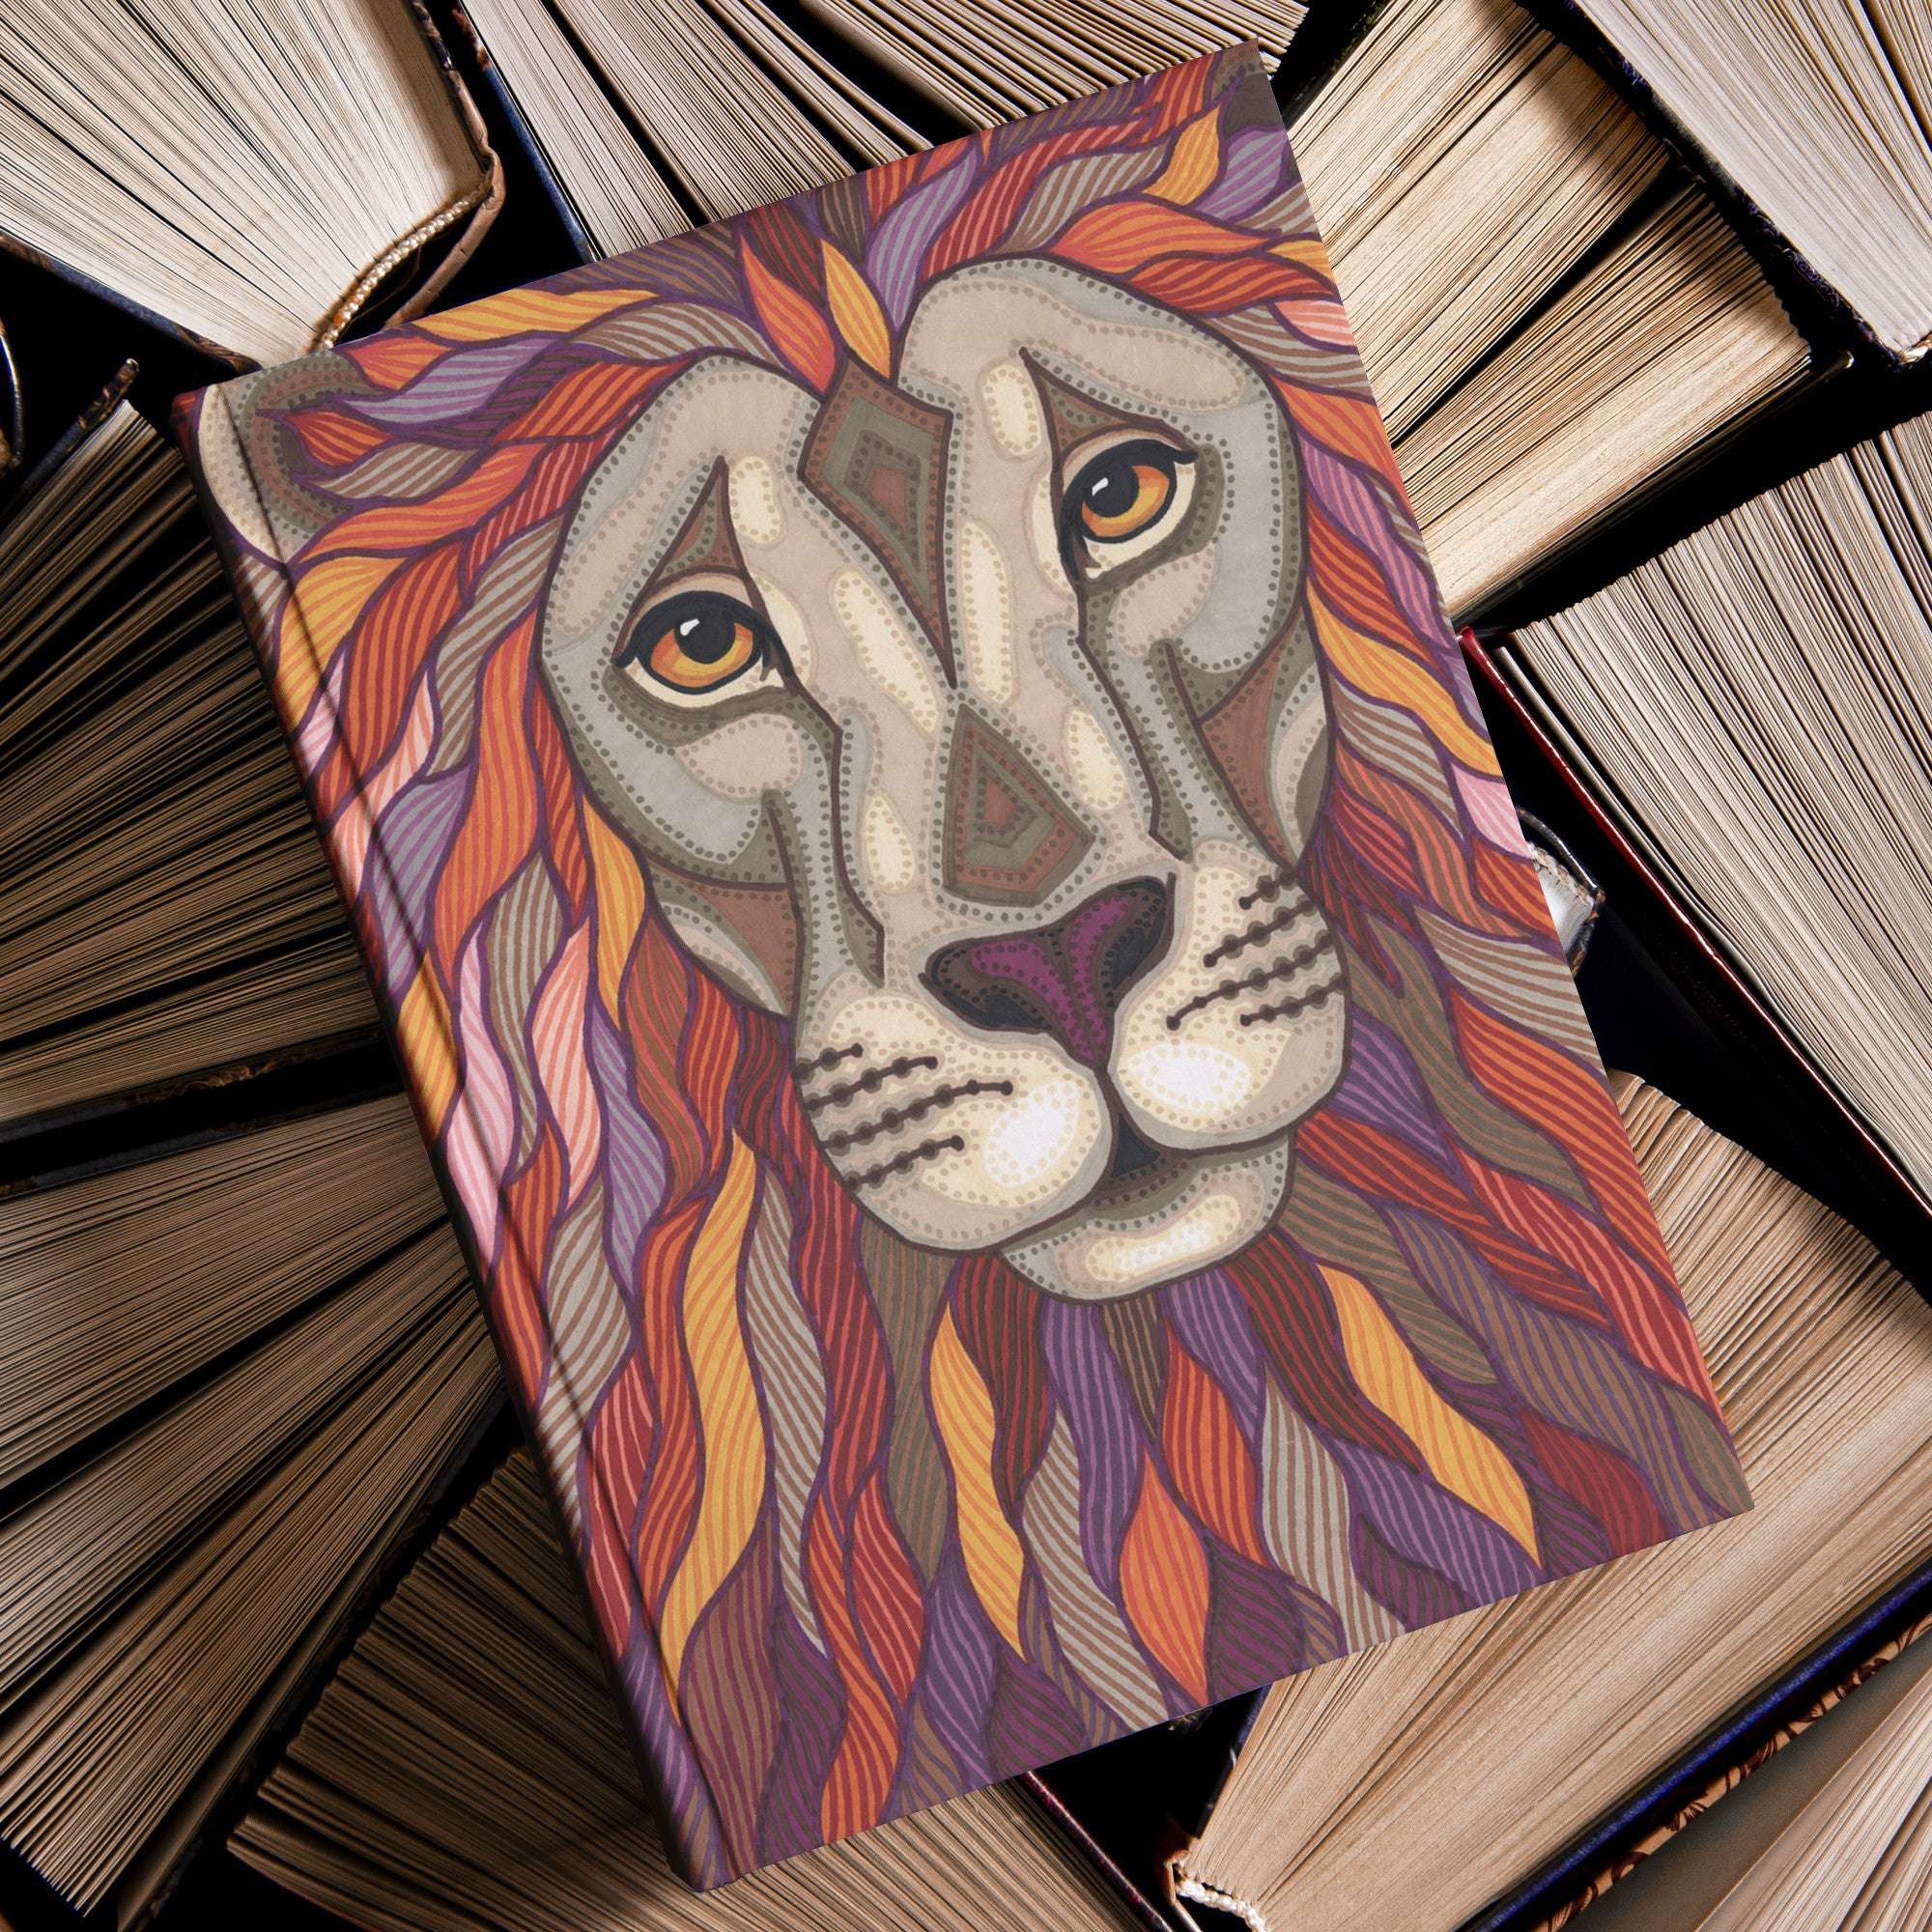 Illustrated Lion Pride Journal lies on top of a pile of old hardcover books.